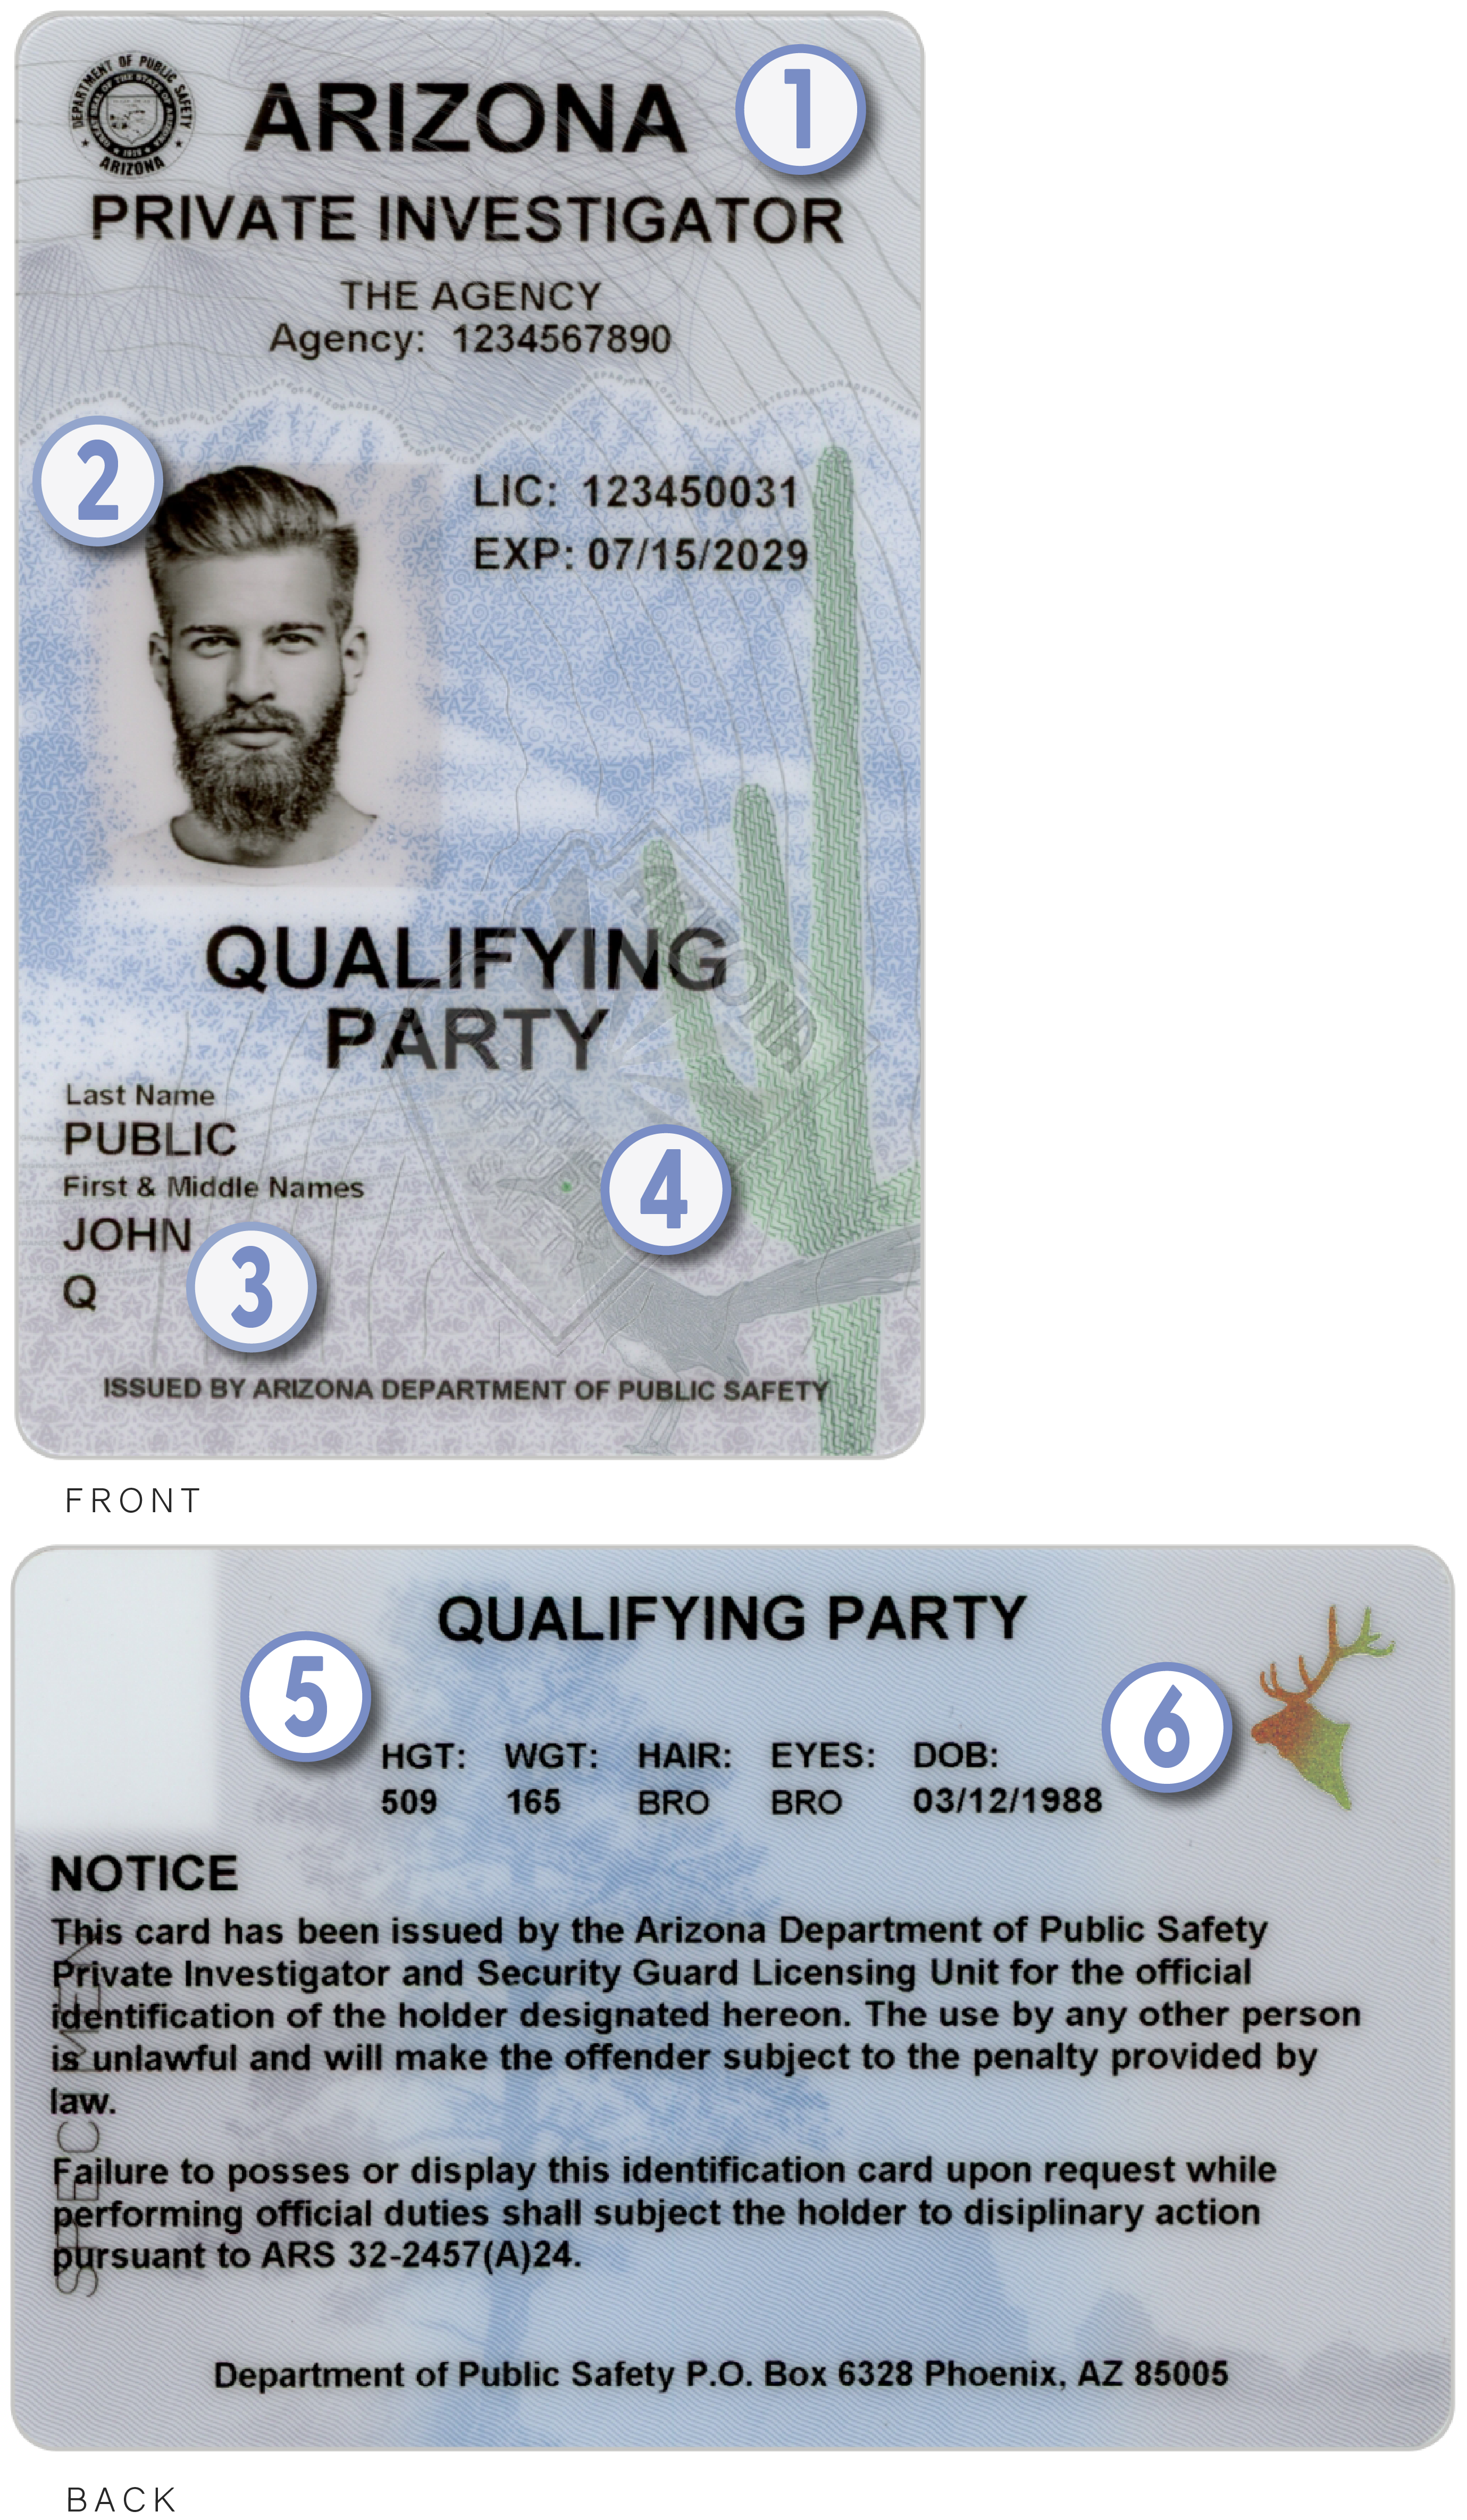 New PI Qualifying Party Card